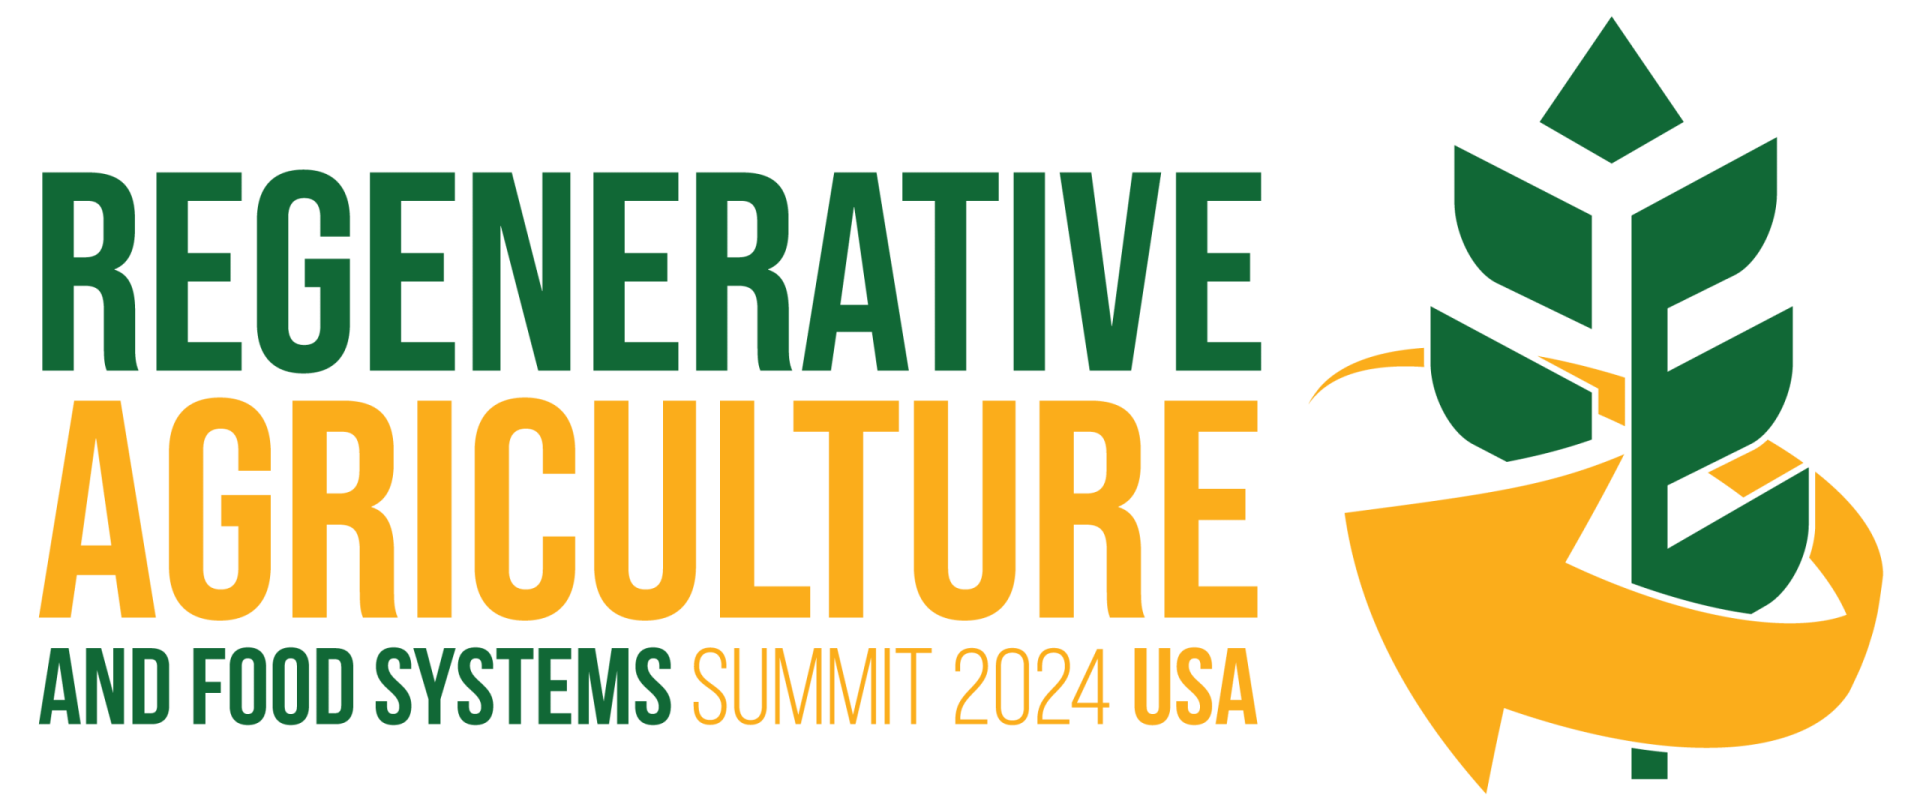 Regenerative Agriculture & Food Systems Summit USA